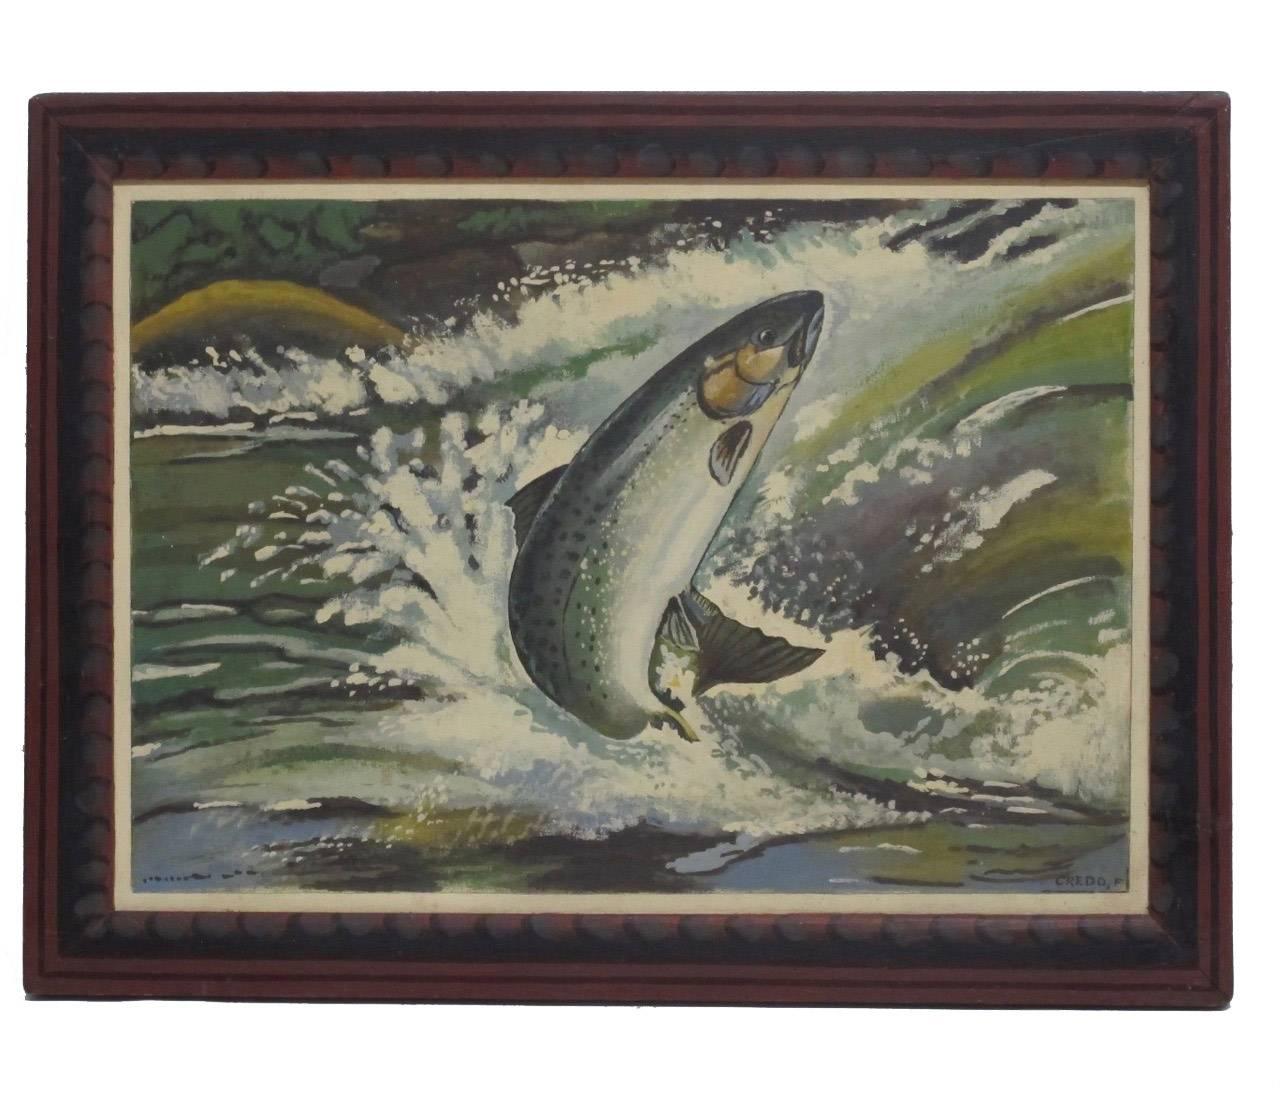 Folk Art painting of a trout, oil on canvas mounted on board in original hand painted frame. Signed Credo F. in lower right. American, 1930s-1950s.